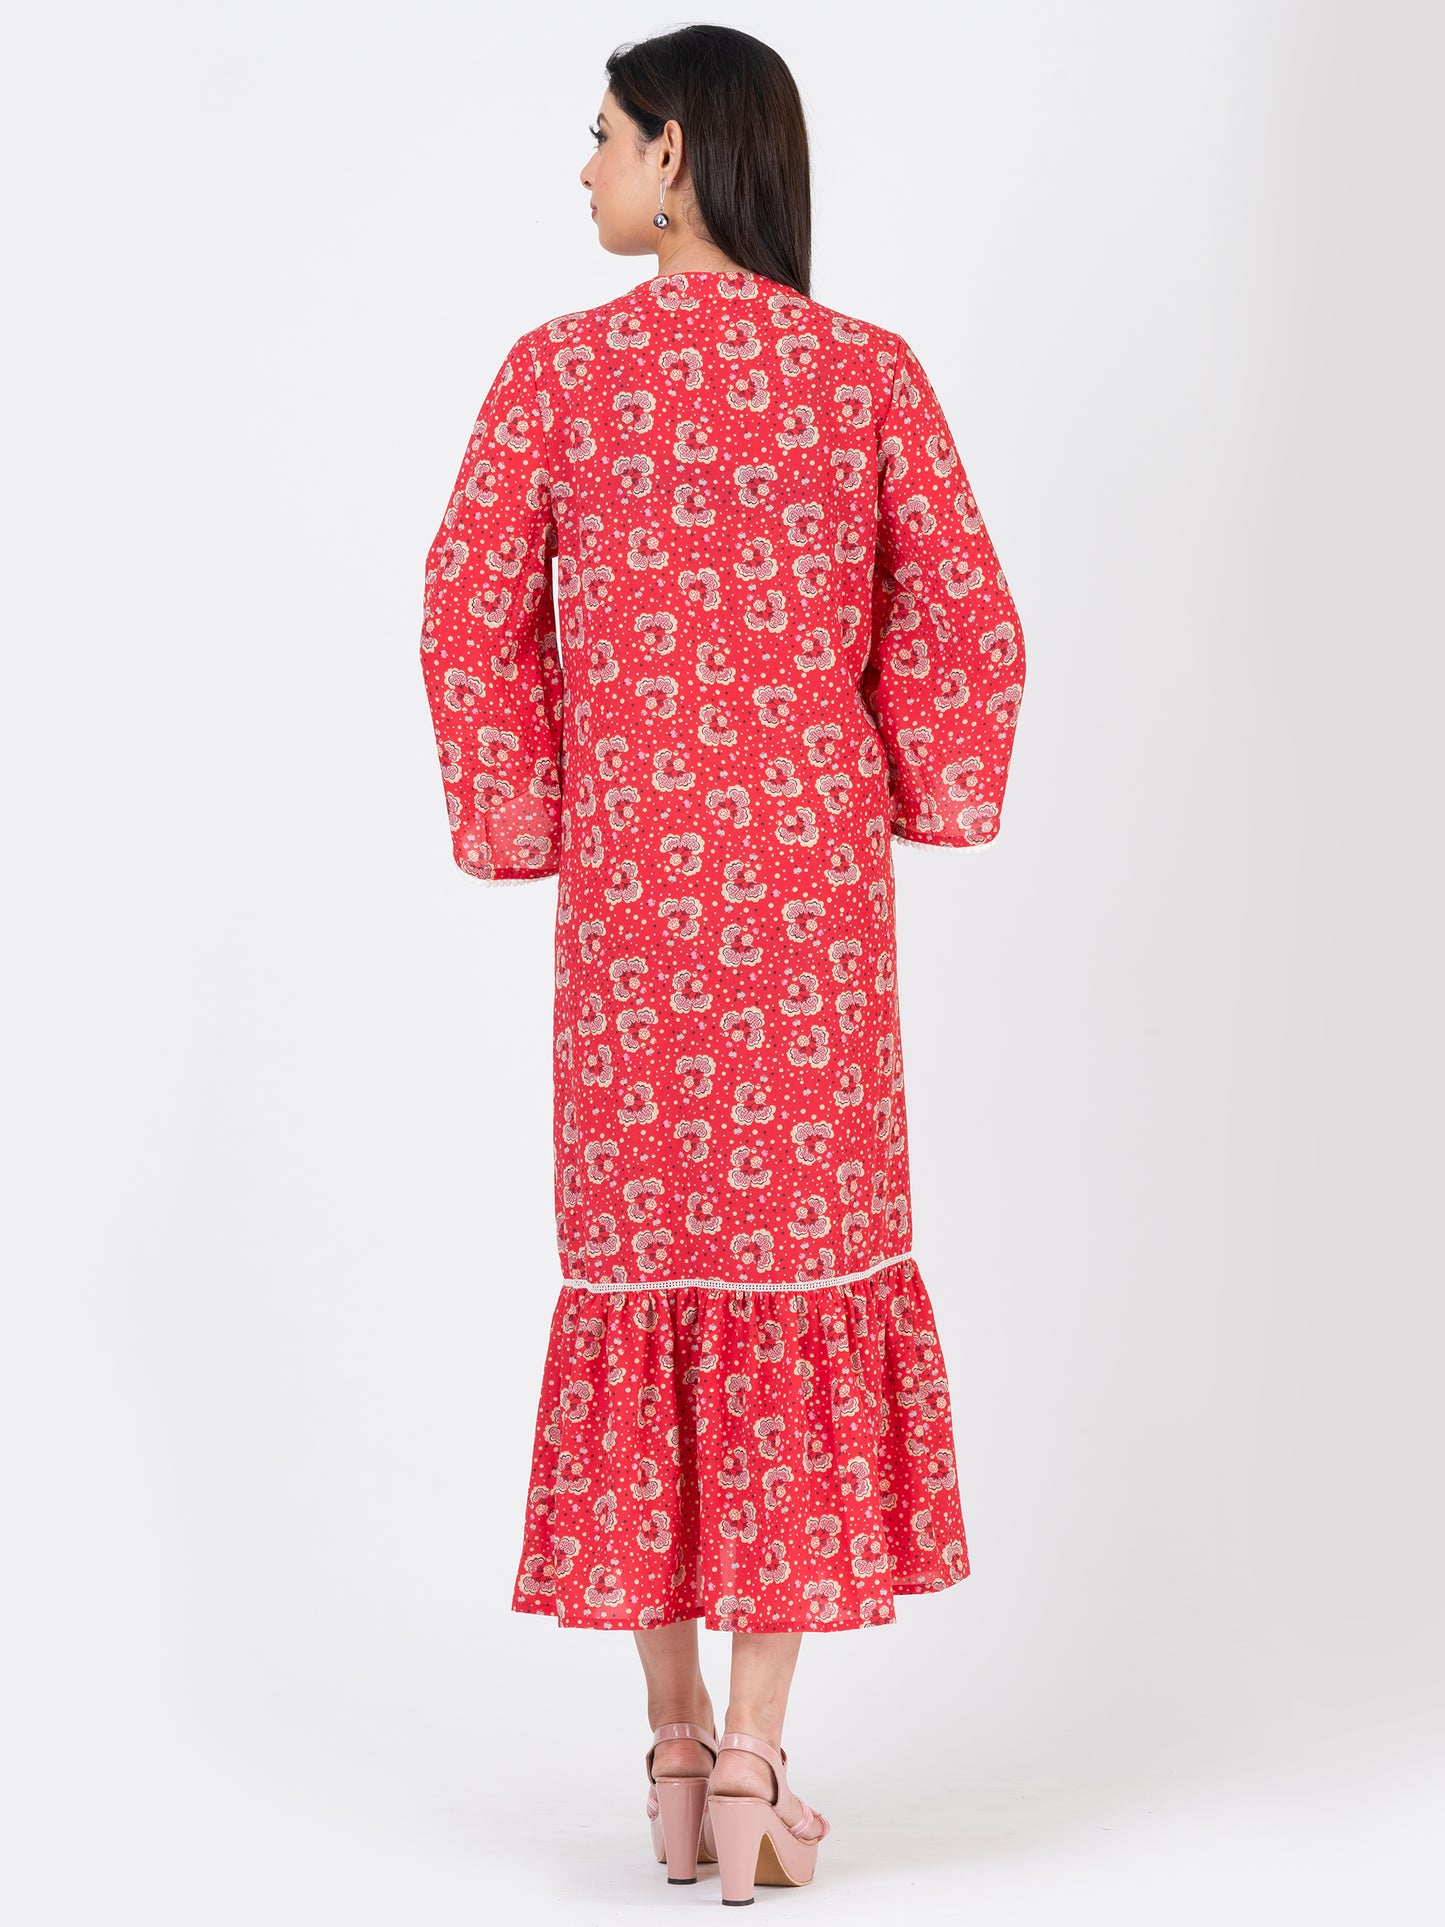 Women's Floral Printed Coral Casual Midi Dress